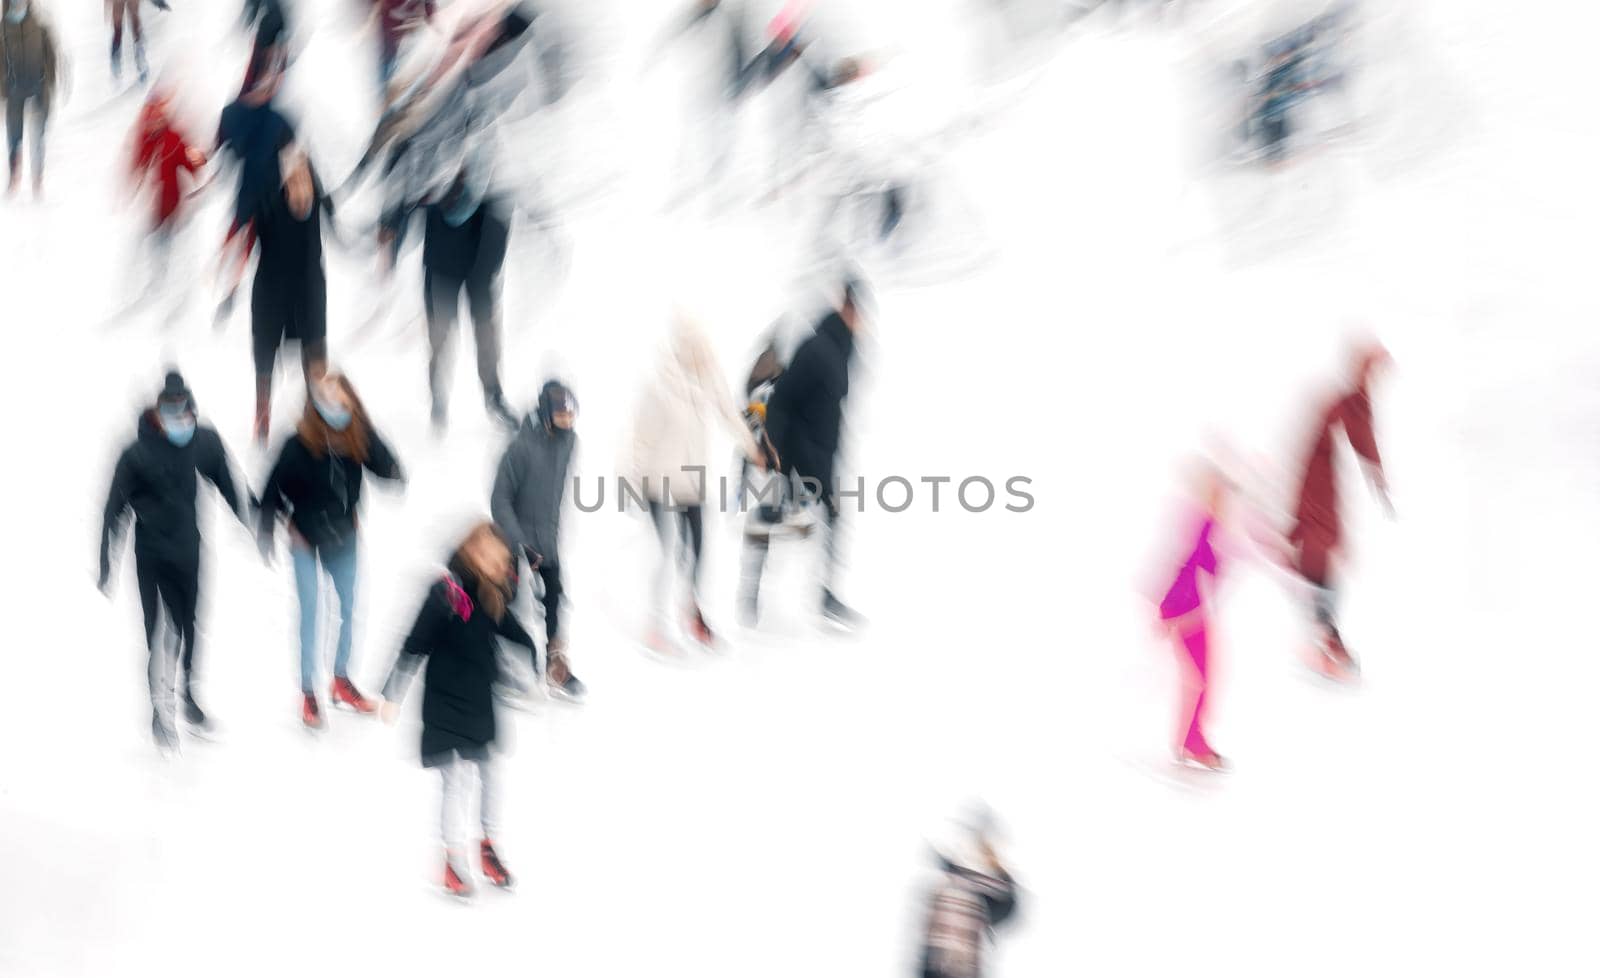 Motion blurred abstract image of people skating on an ice rink. Ice-skating people.